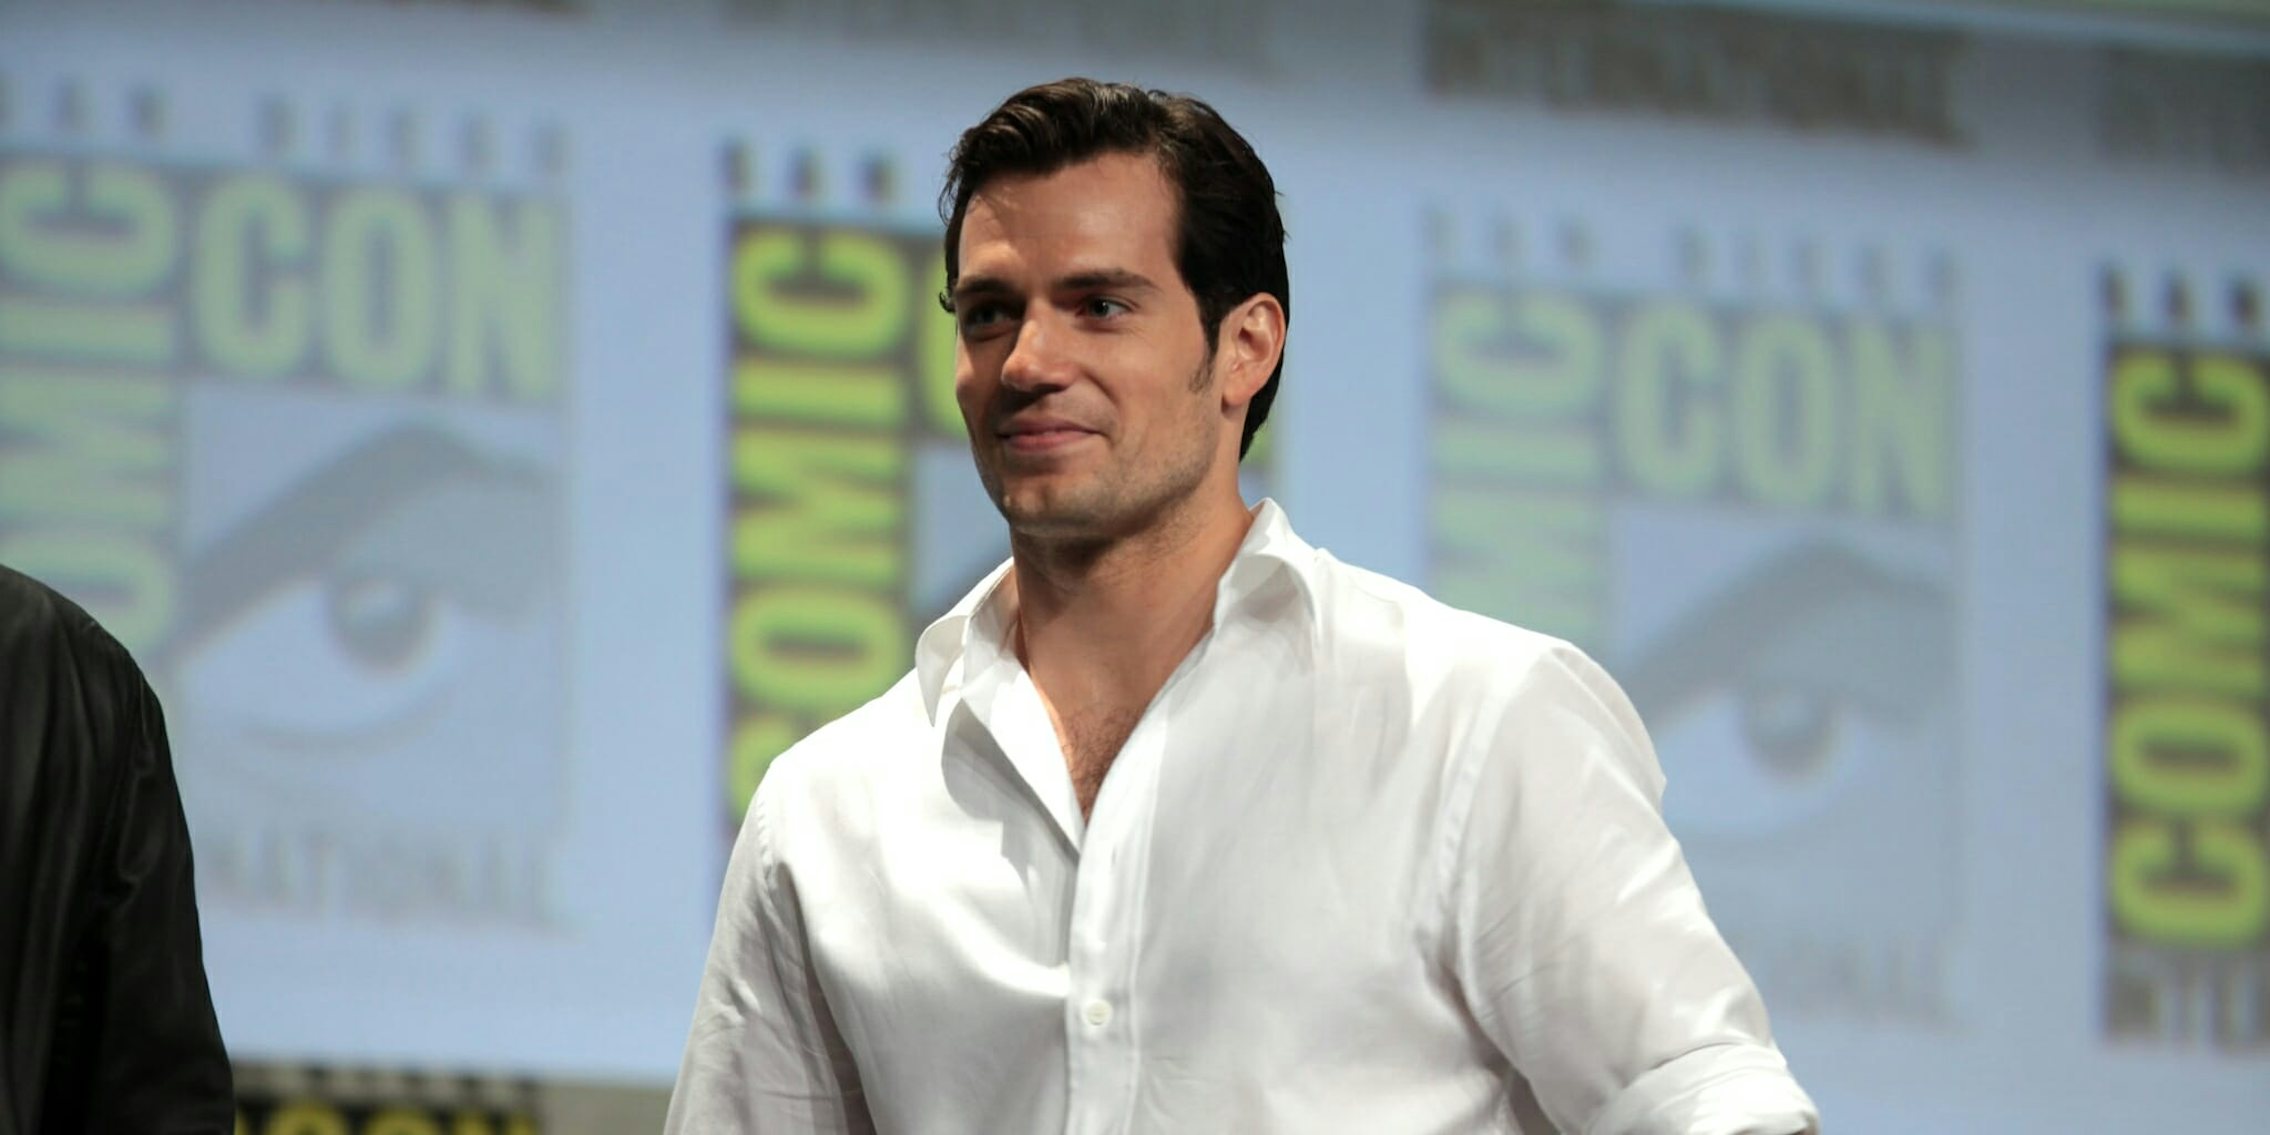 Watch: Henry Cavill Rocks Superman Shirt But Isn't Recognized in